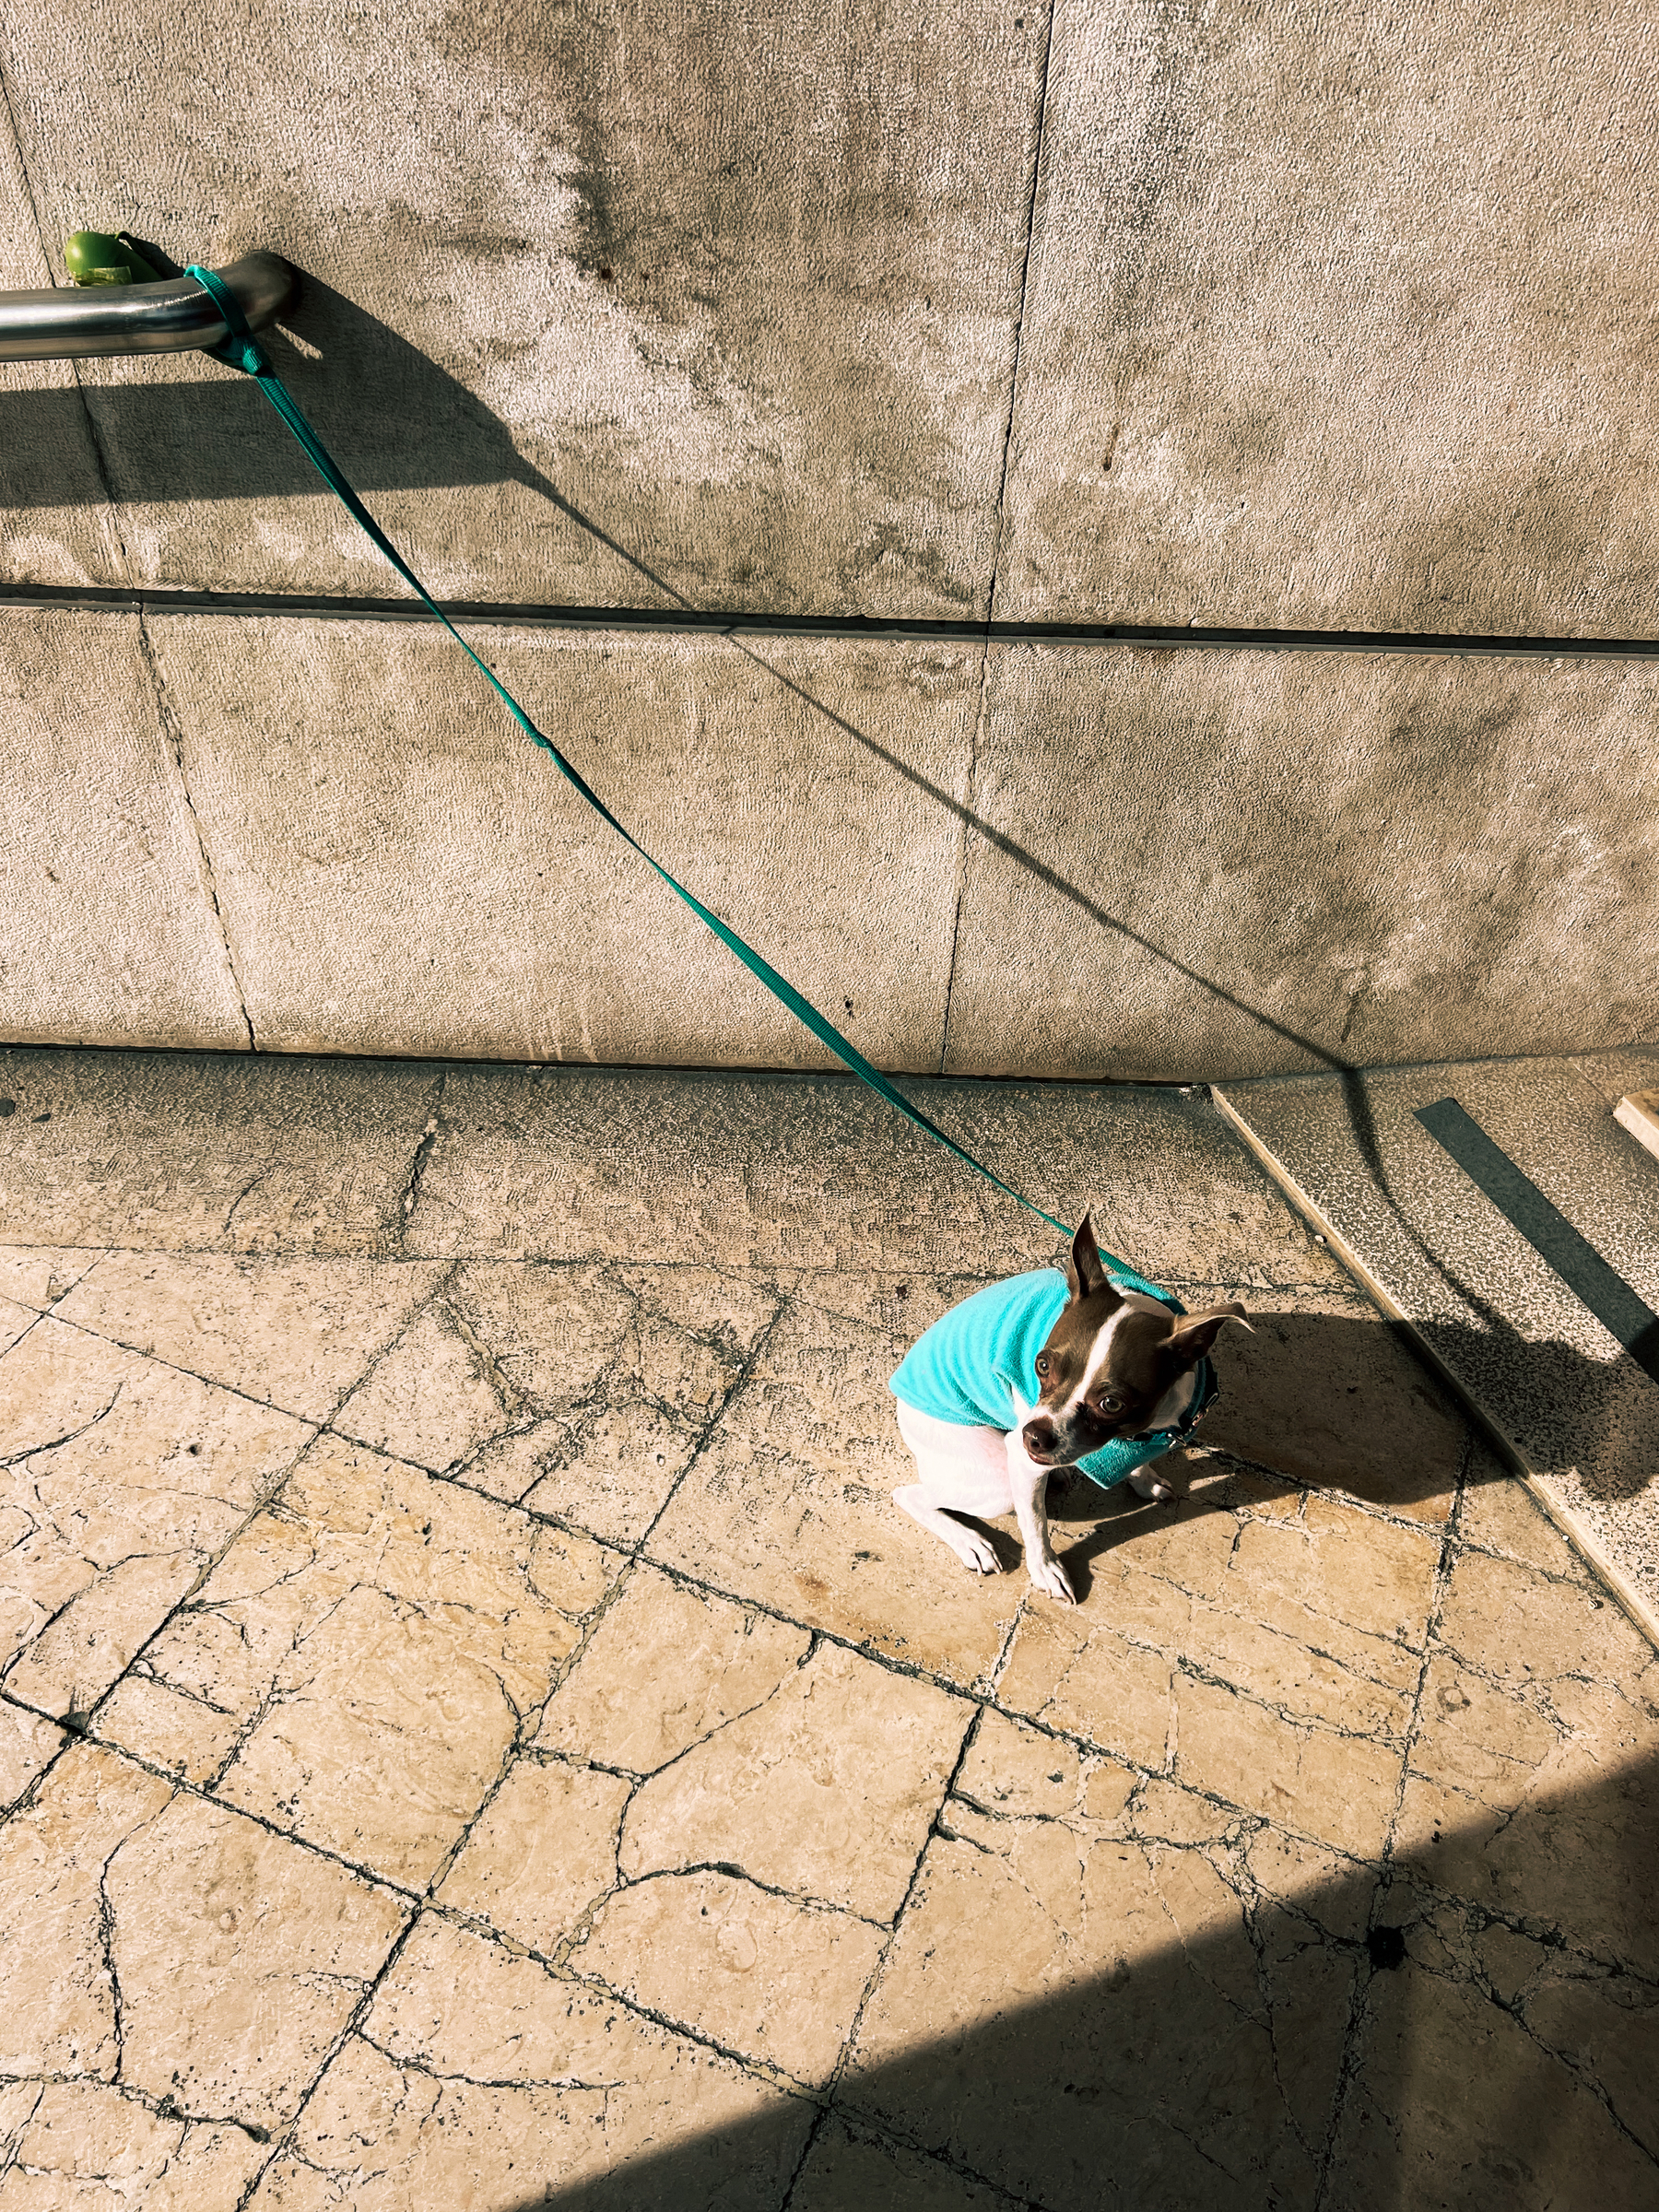 A small dog wearing a turquoise sweater tied to a metal railing with a green leash, standing on a patterned pavement and looking upwards, with shadows casting over the scene.